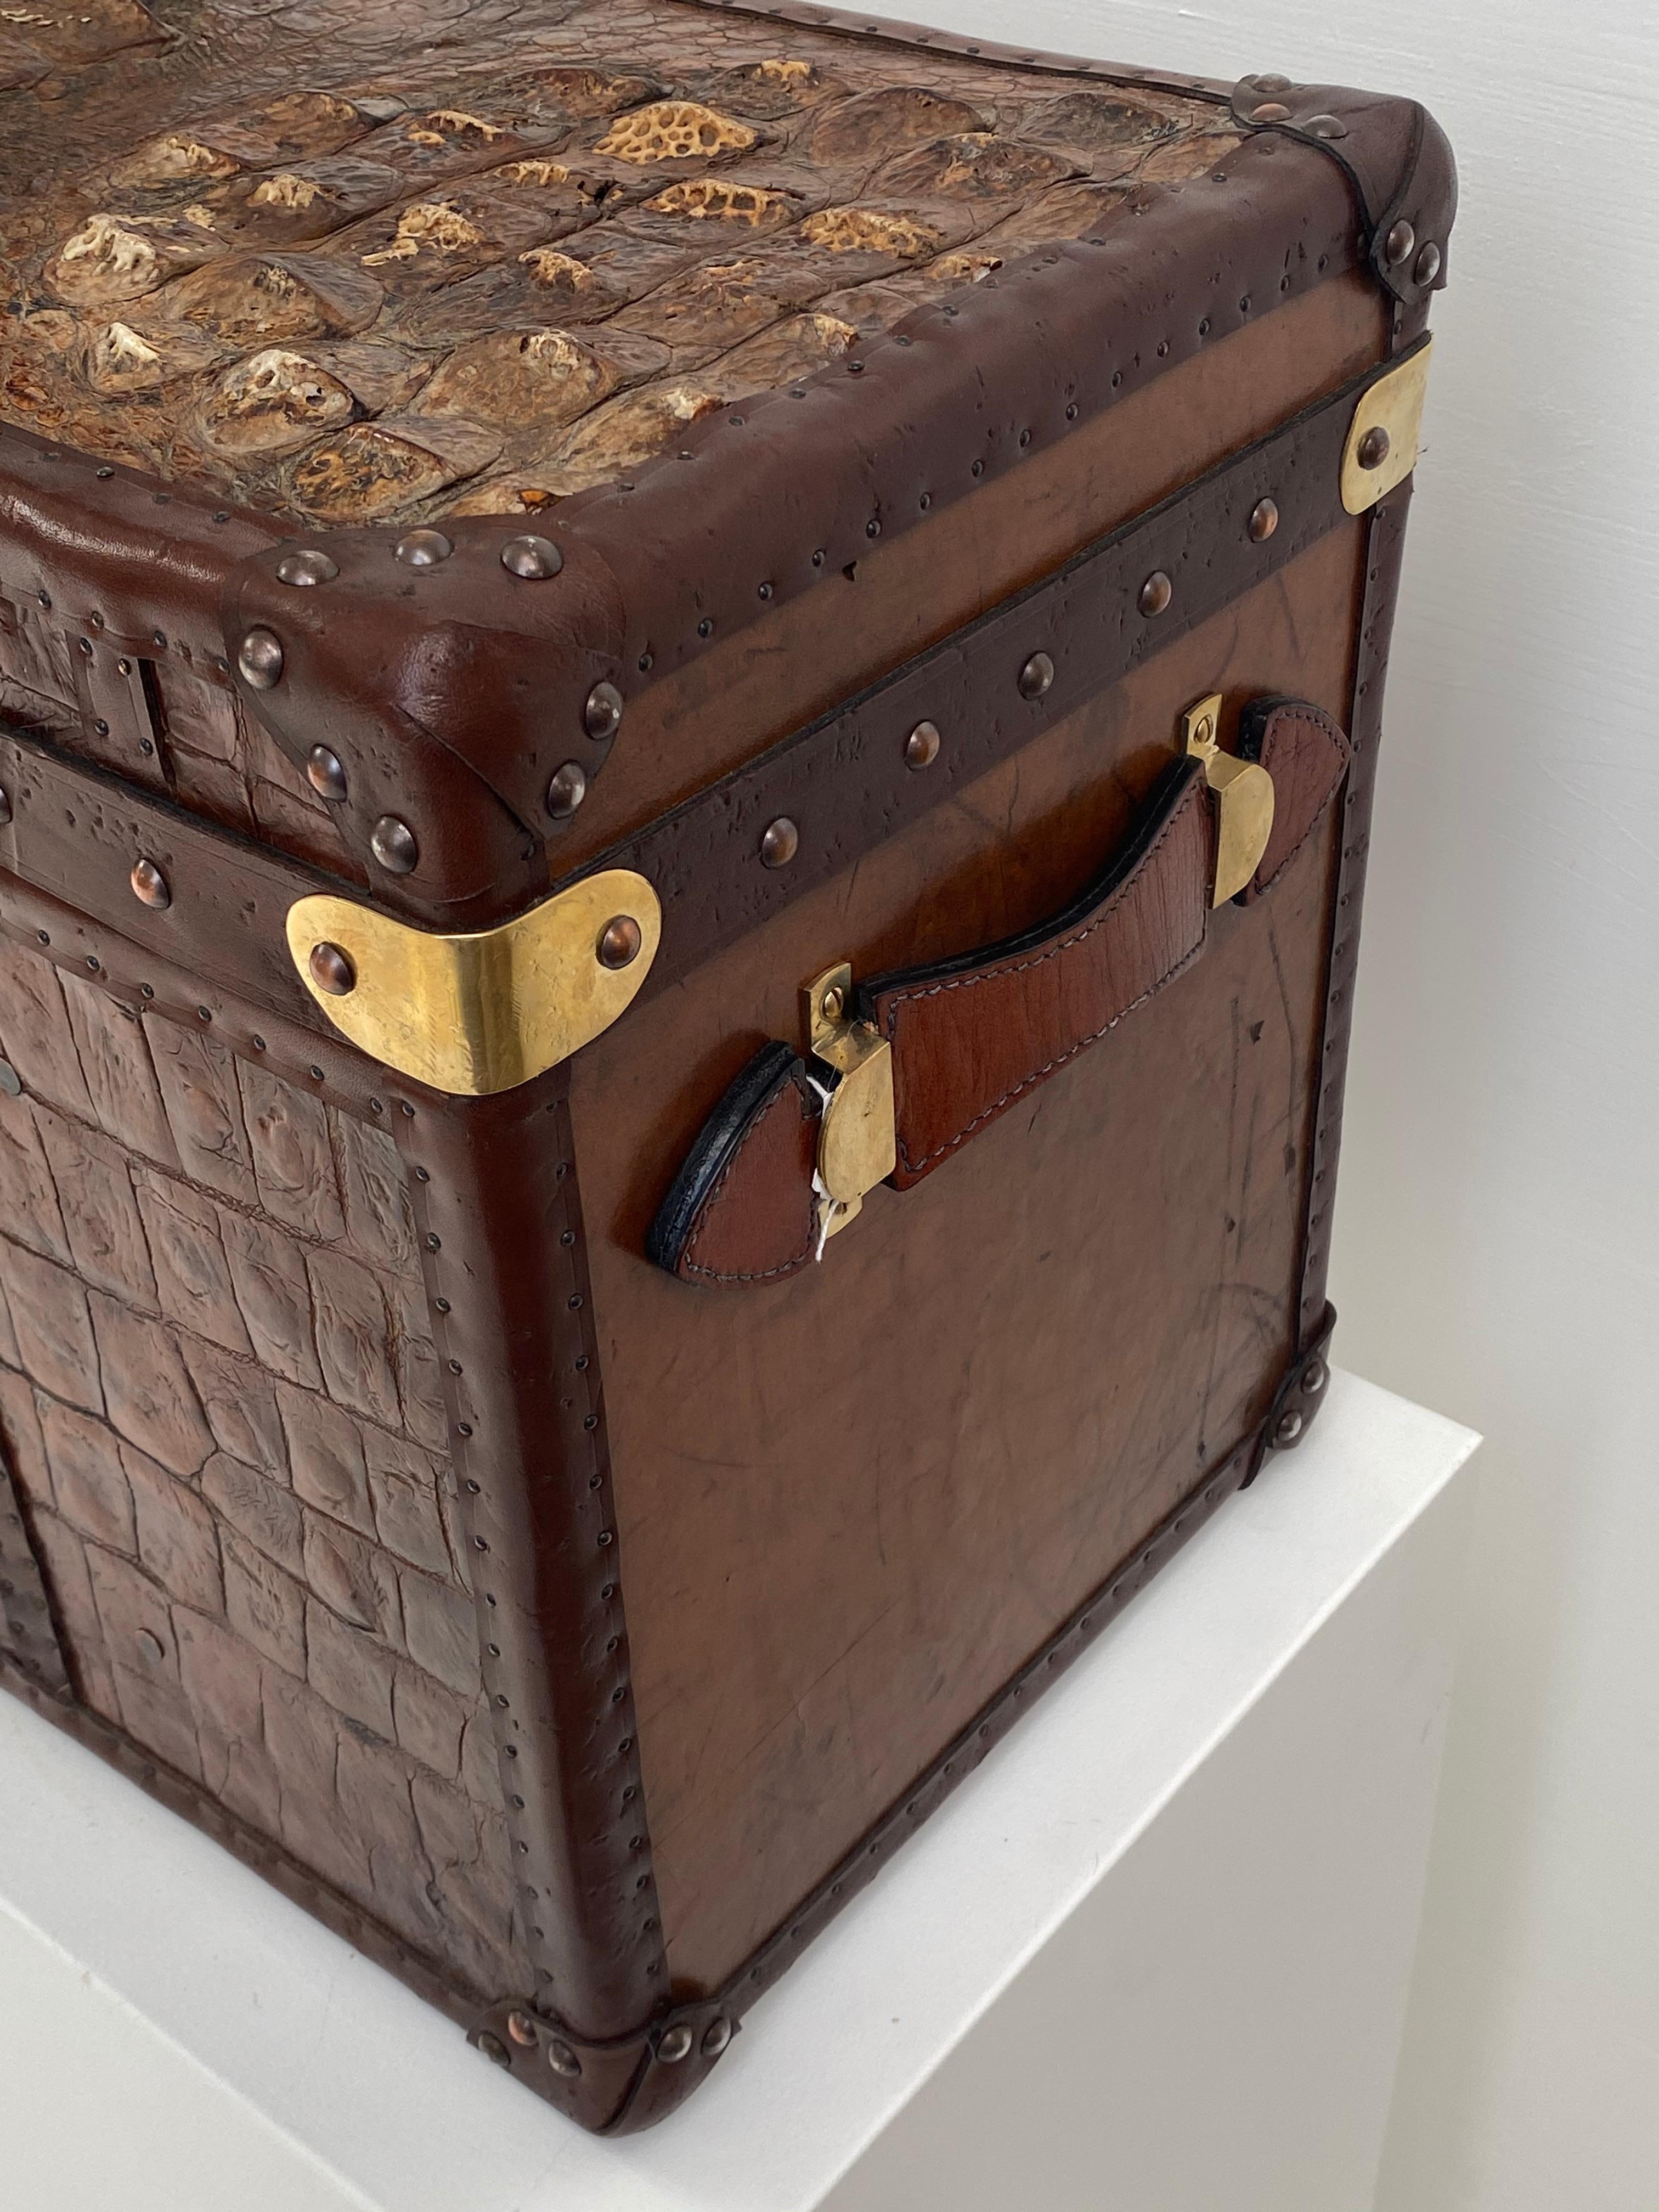 Exceptional English Antique Leather Trunk with Crocodile Skin Top In Excellent Condition For Sale In Schellebelle, BE